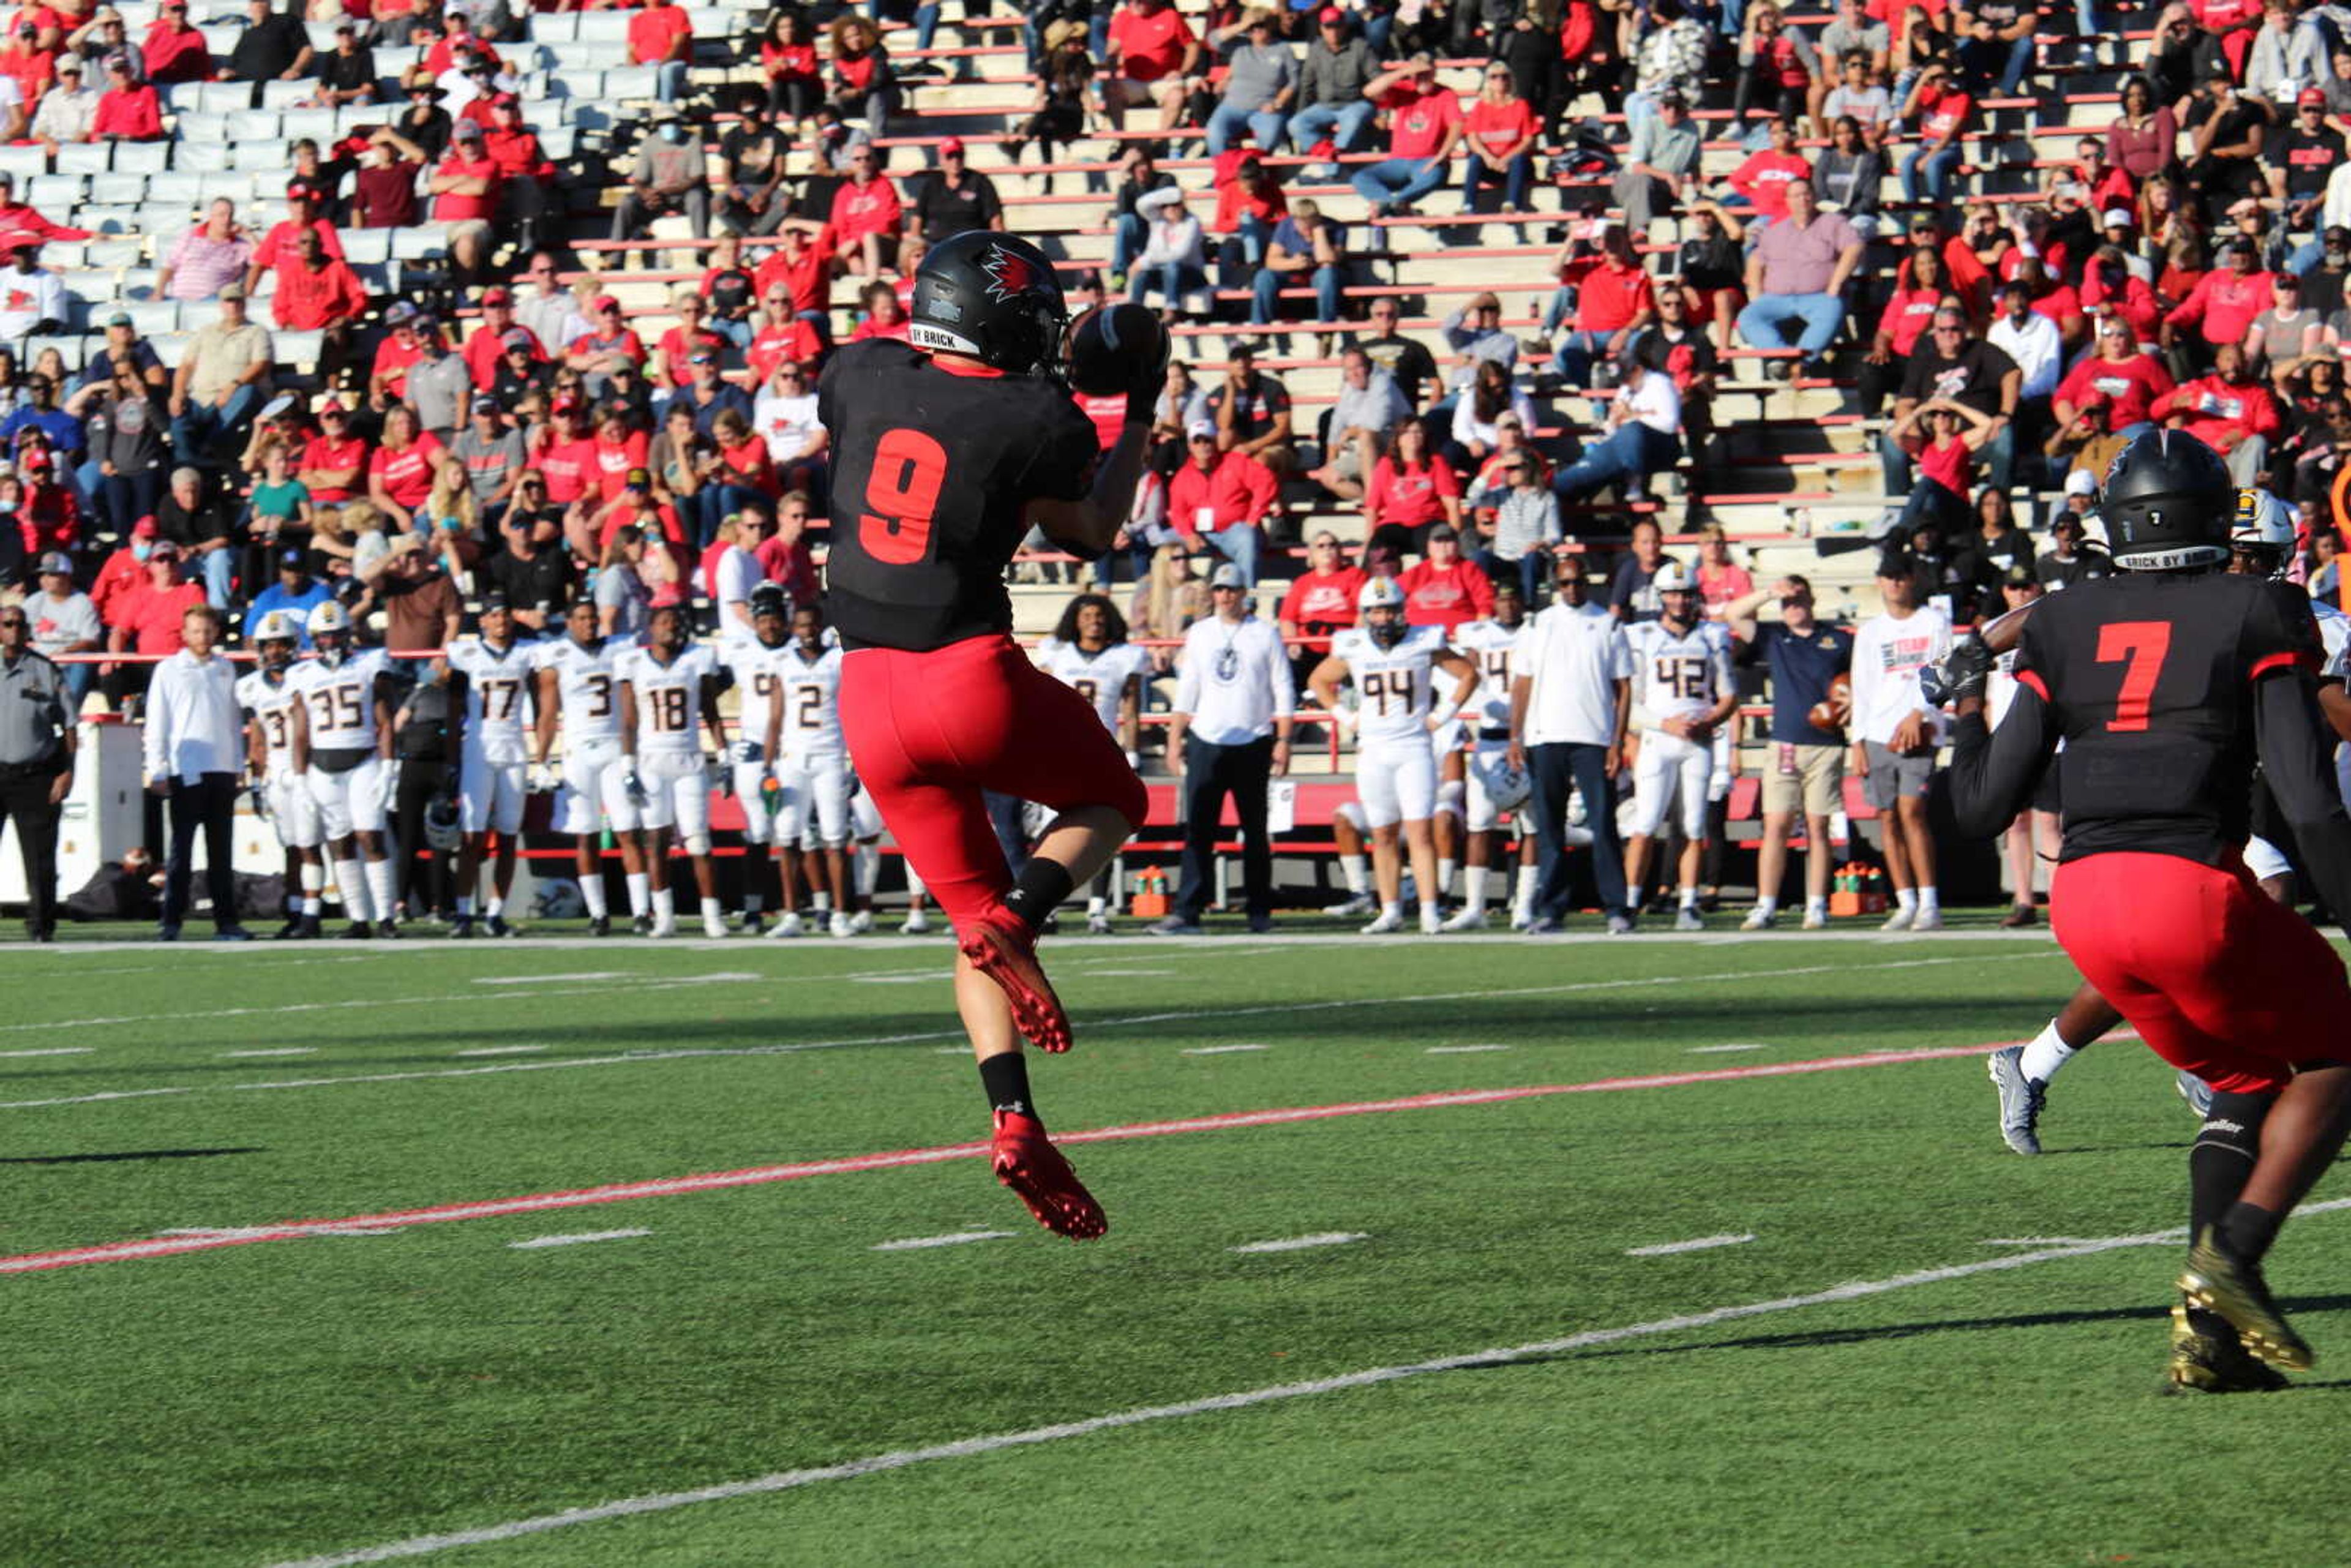 Last-second field goal seals Redhawks fate in loss against Racers